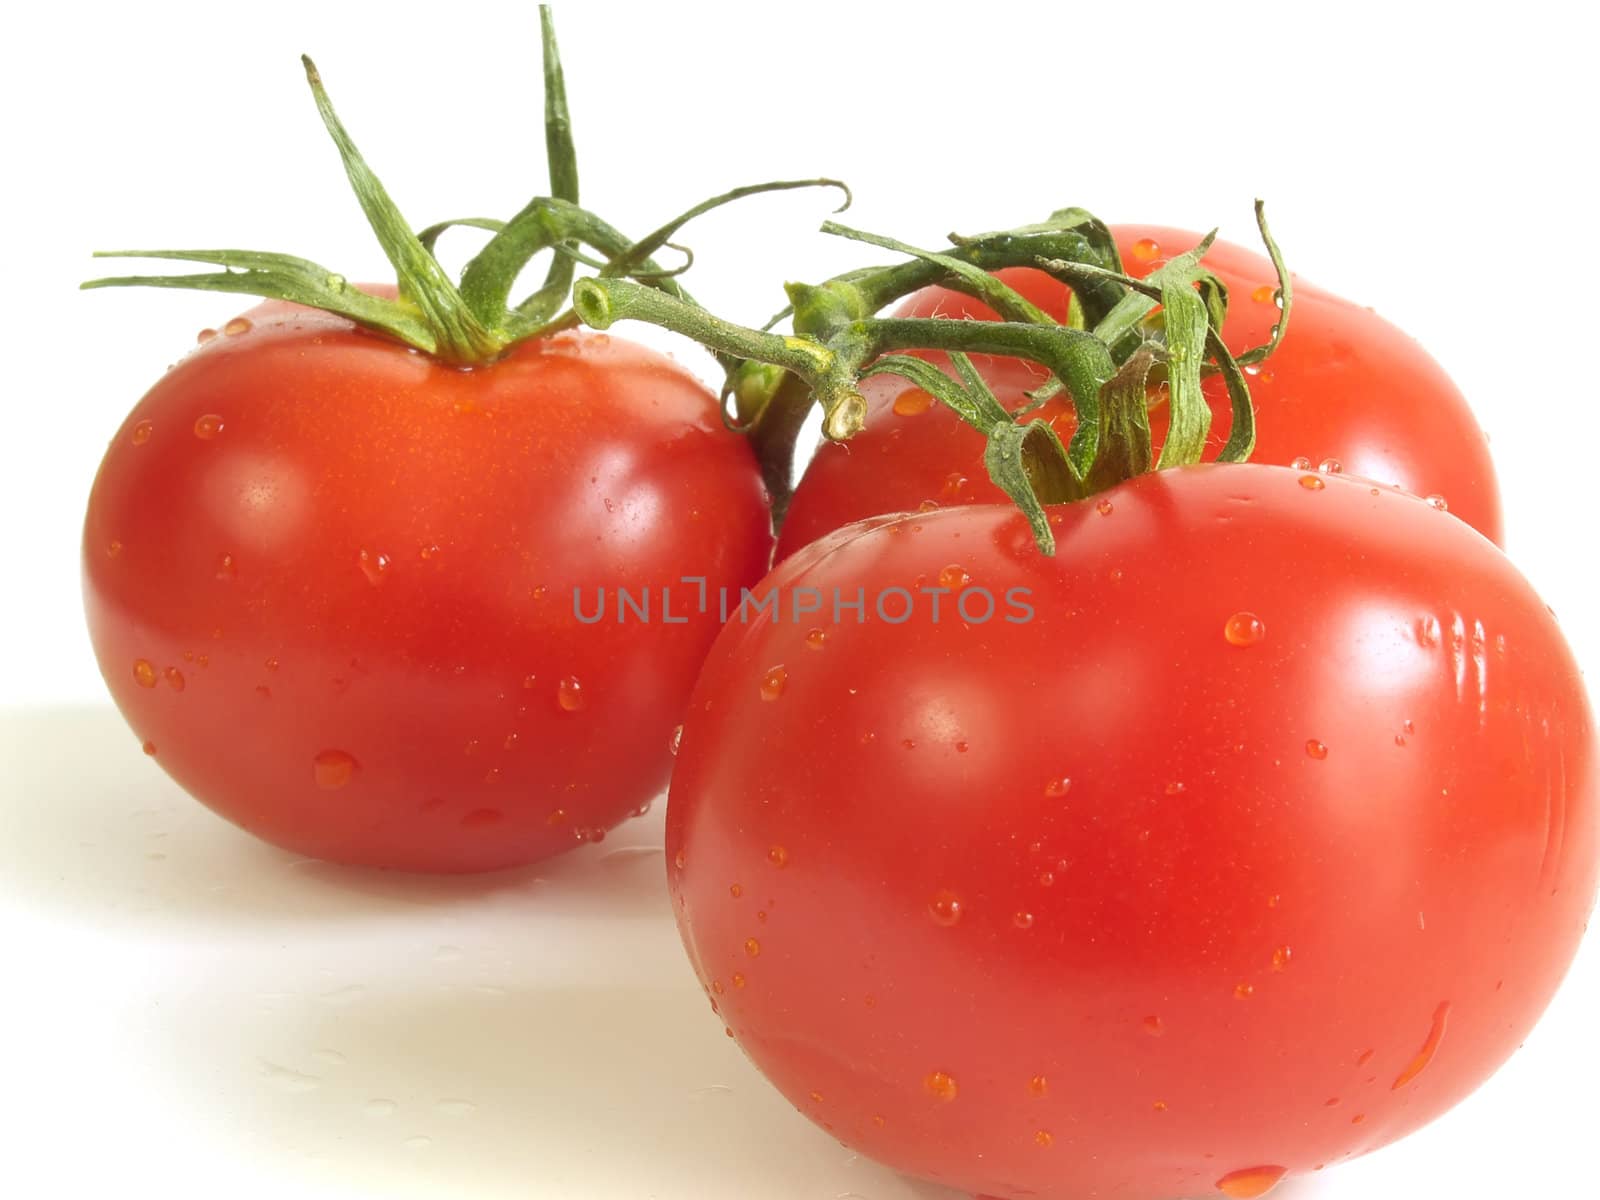 Tree vine tomatoes, fresh with water droplets, isolated on white

